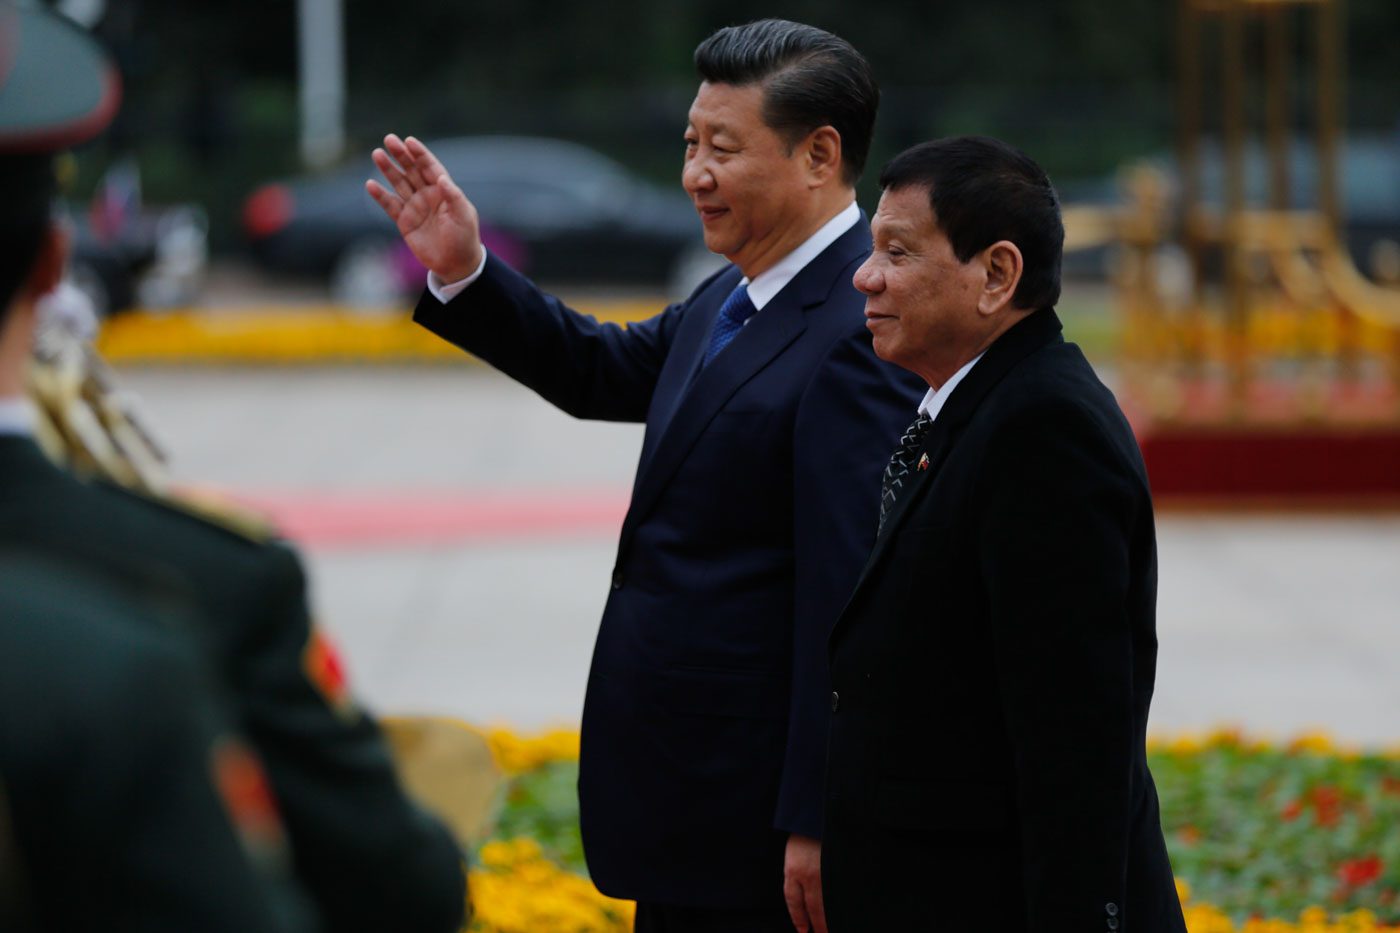 CHINA VISIT. President Rodrigo Duterte is accompanied by China President Xi Jinping during his arrival at the Great Hall of the People in Beijing, China on October 20, 2016. Malacanang photo 